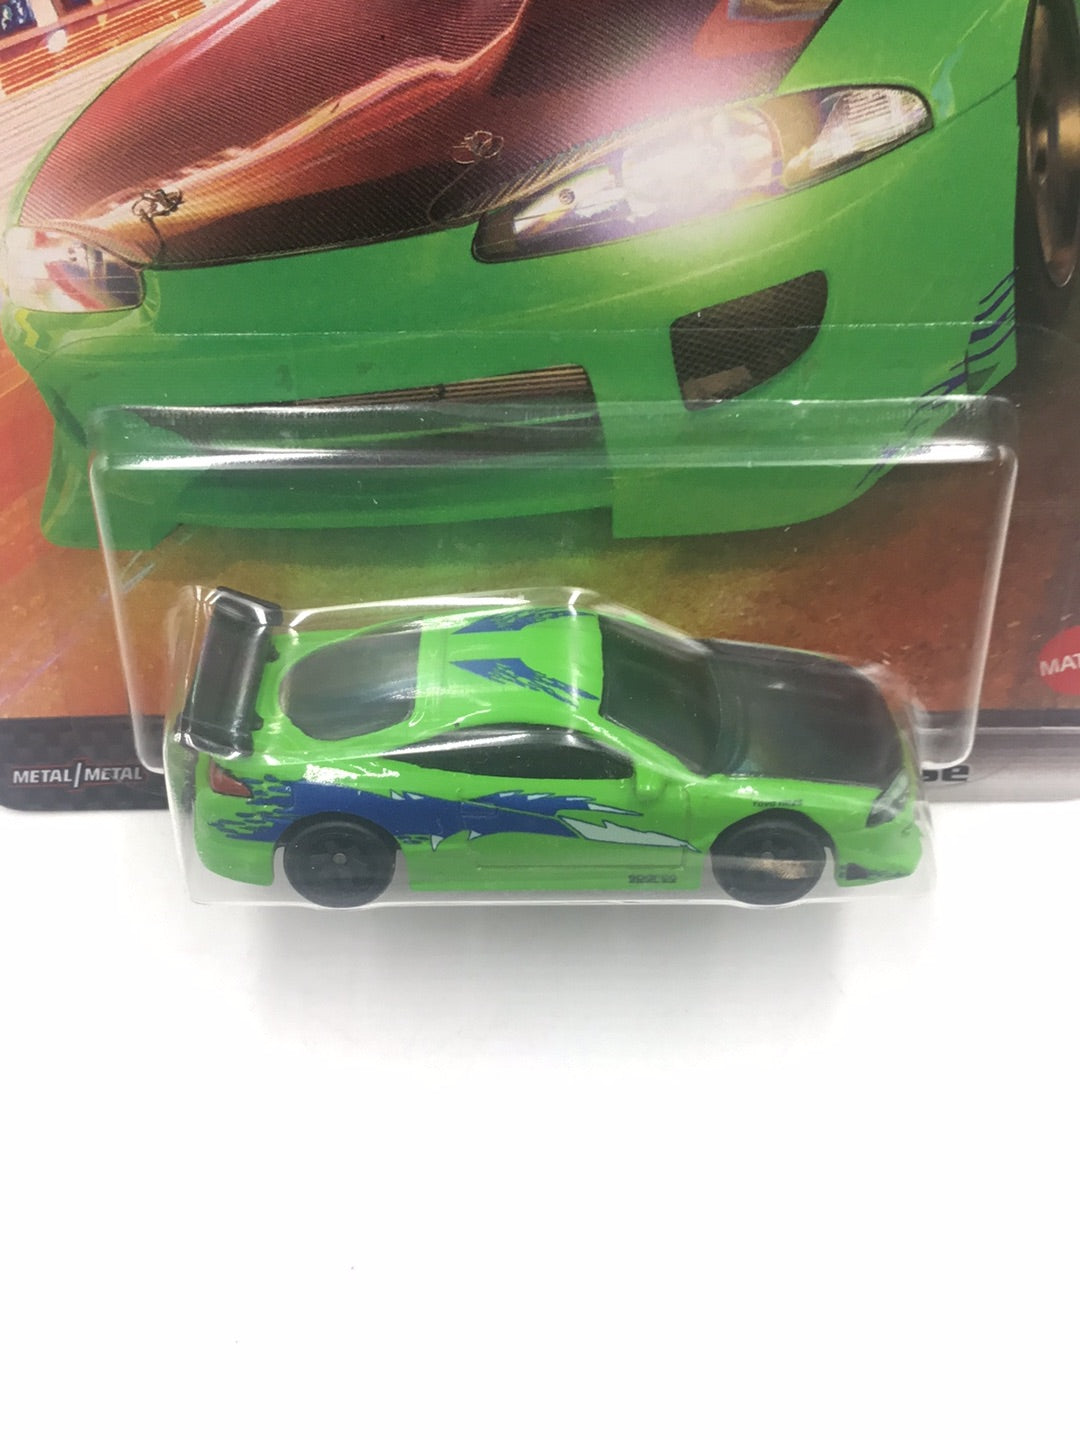 Hot wheels fast and furious #1 95 Misubishi Eclipse 1/5 G2